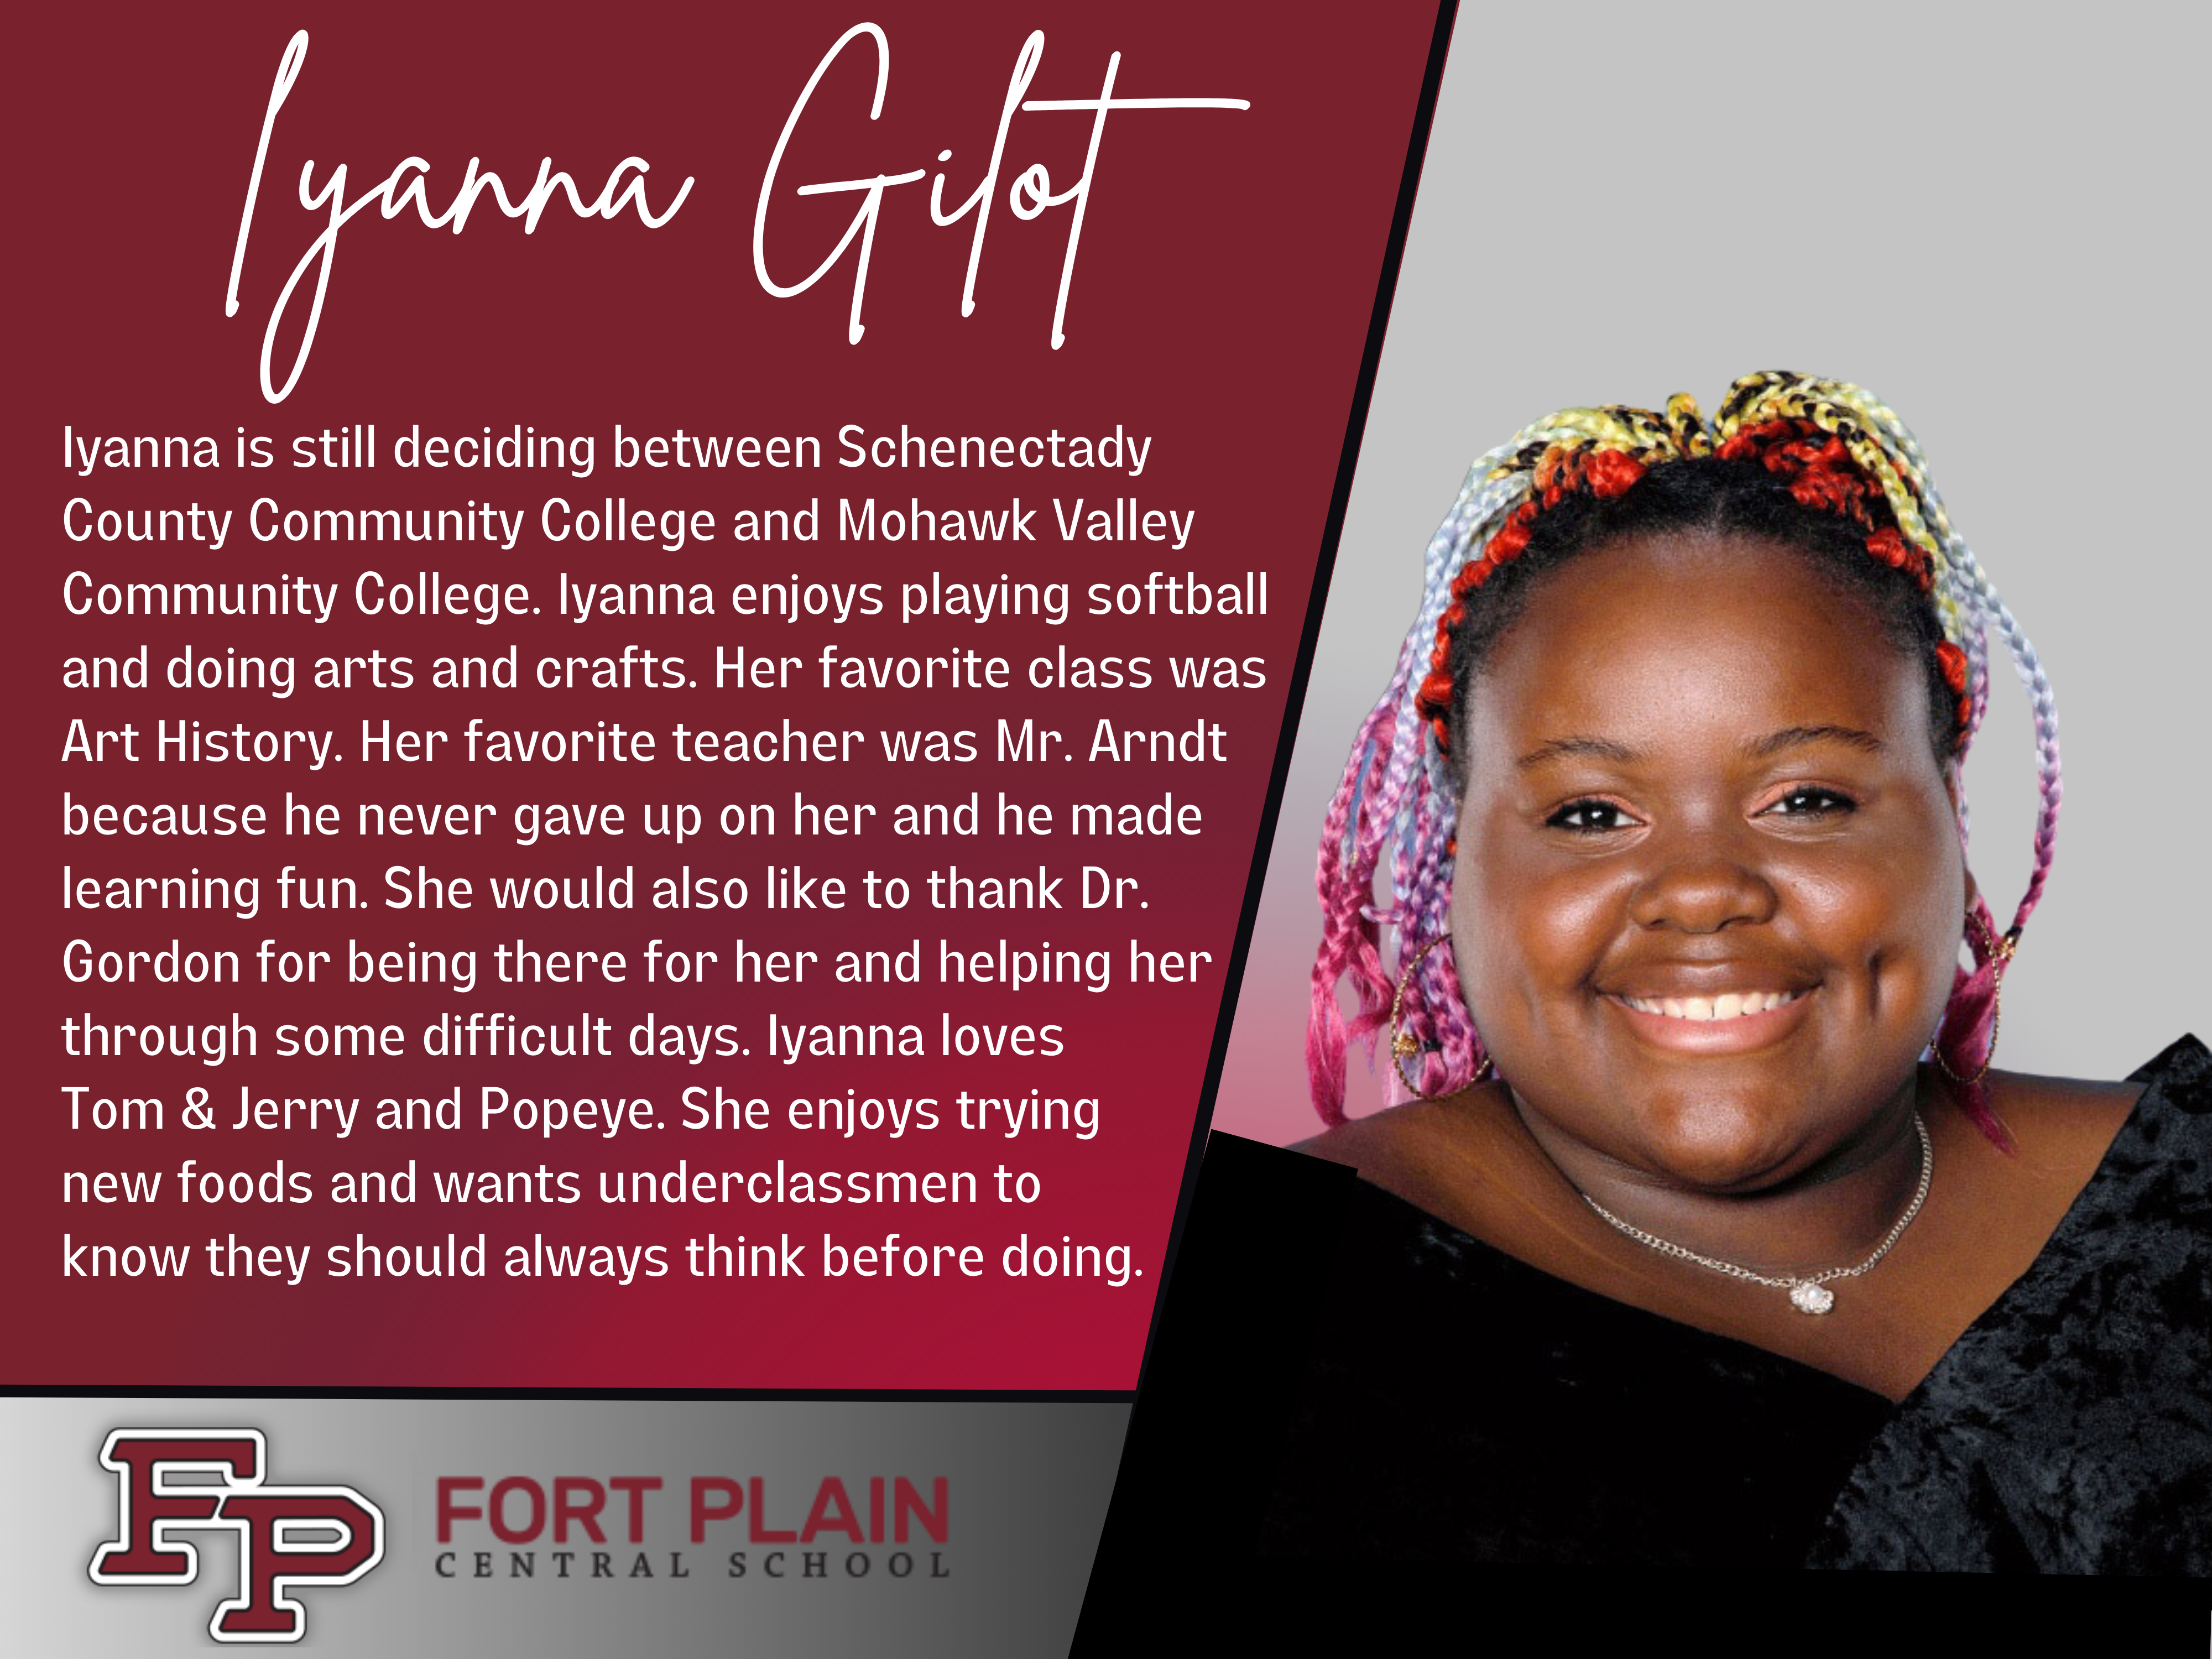 photo of and info about Iyanna